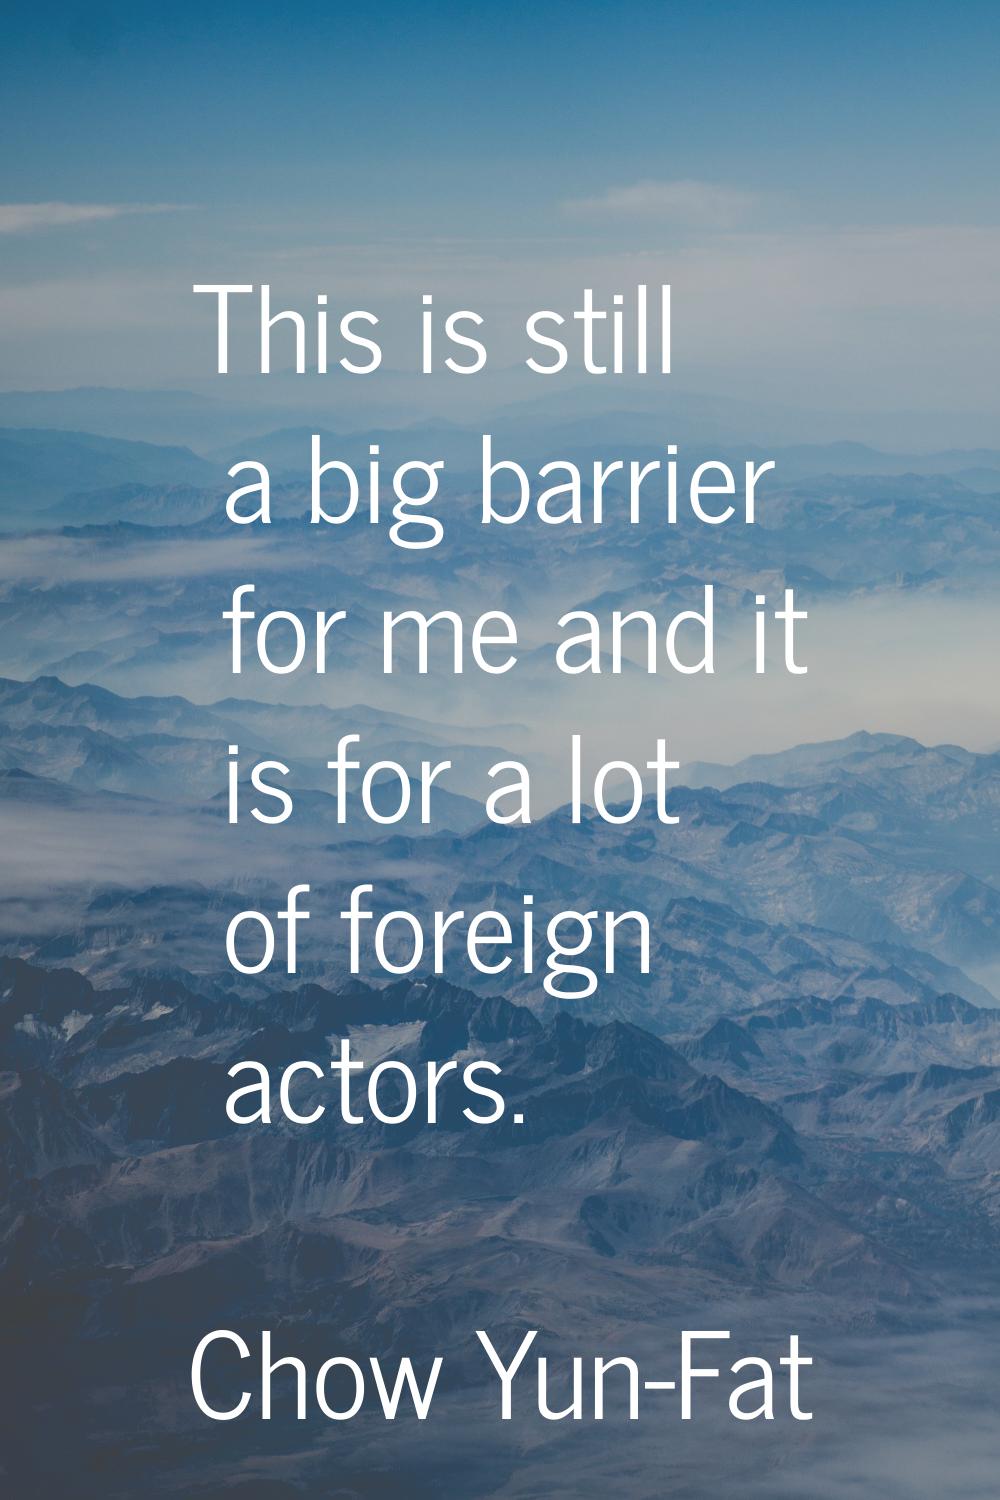 This is still a big barrier for me and it is for a lot of foreign actors.